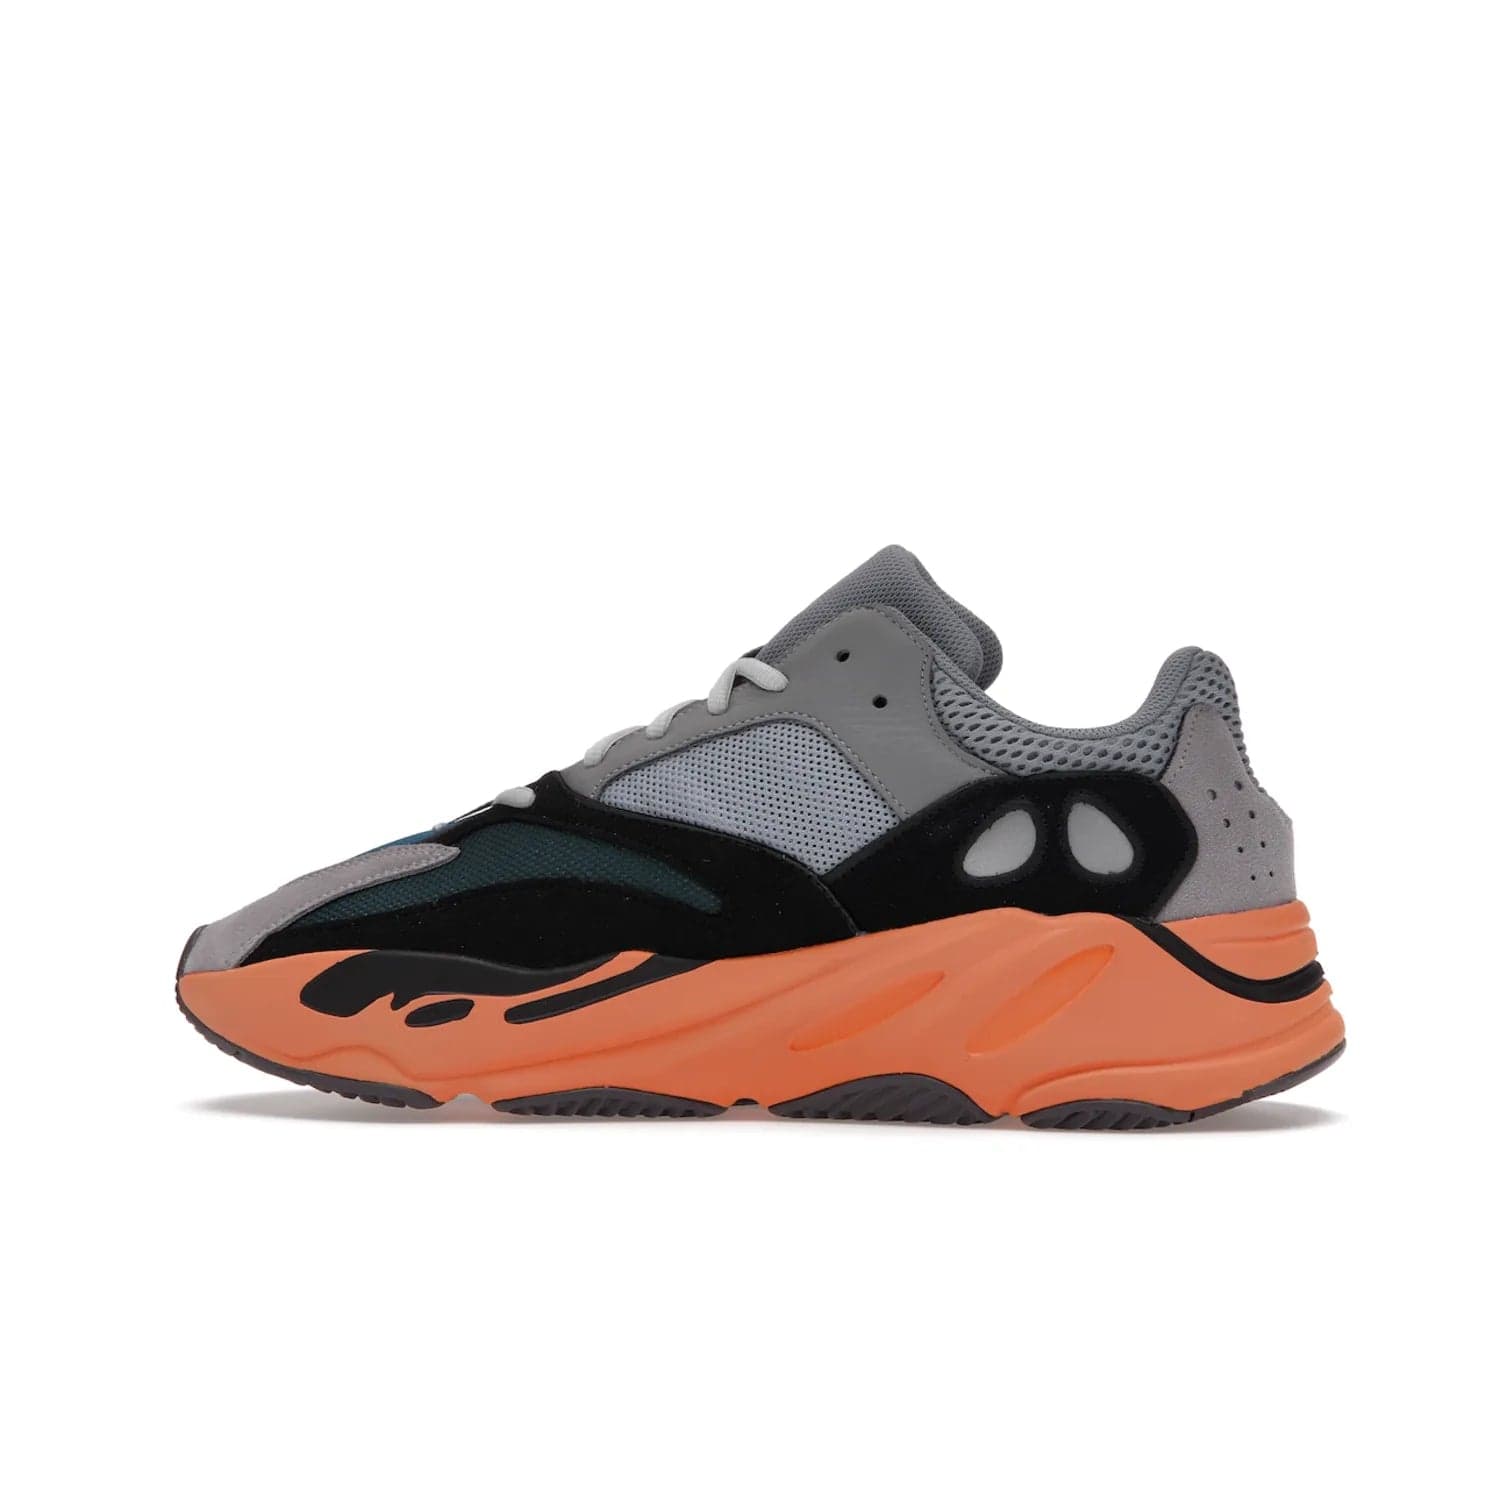 adidas Yeezy Boost 700 Wash Orange - Image 20 - Only at www.BallersClubKickz.com - Introducing the adidas Yeezy Boost 700 Wash Orange. Unique grey leather, suede, mesh upper and teal panels with a chunky Wash Orange Boost midsole. Release October 2021, make a statement today!